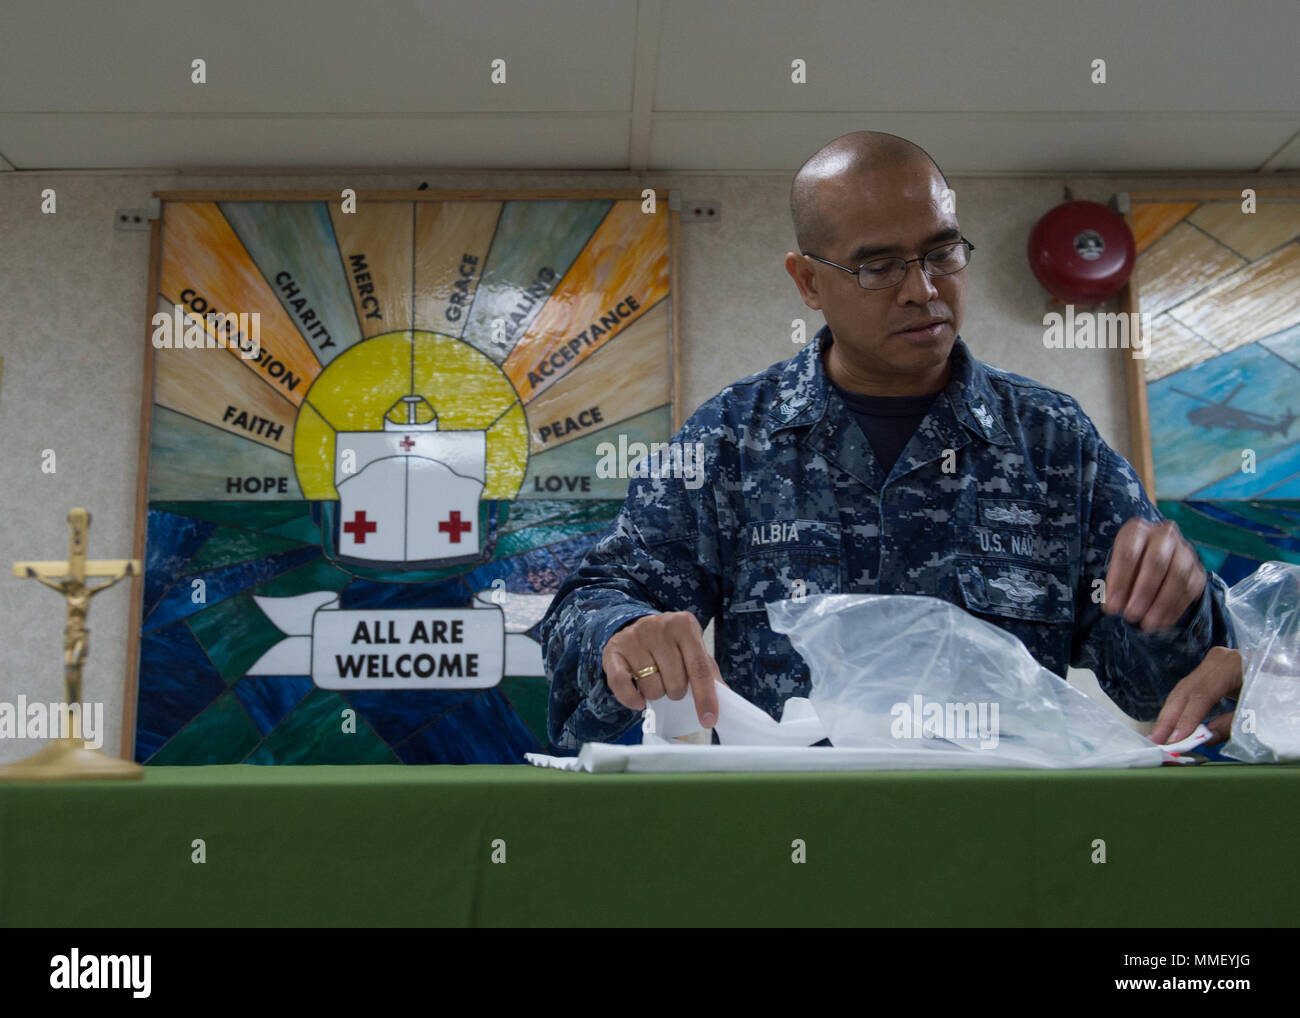 171030-N-MU198-002 SAN JUAN, Puerto Rico (Oct. 30, 2017) Religious Program Specialist 1st Class Adonis Albia prepares the chapel of the Military Sealift Command hospital ship USNS Comfort (T-AH20) for Catholic mass. Comfort is moored pier side in San Juan, Puerto Rico, to provide humanitarian relief. The Department of Defense is supporting the Federal Emergency Management Agency, the lead federal agency, in helping those affected by Hurricane Maria to minimize suffering and is one component of the overall whole-of-government response effort. (U.S. Navy photo by Mass Communication Specialist 3r Stock Photo